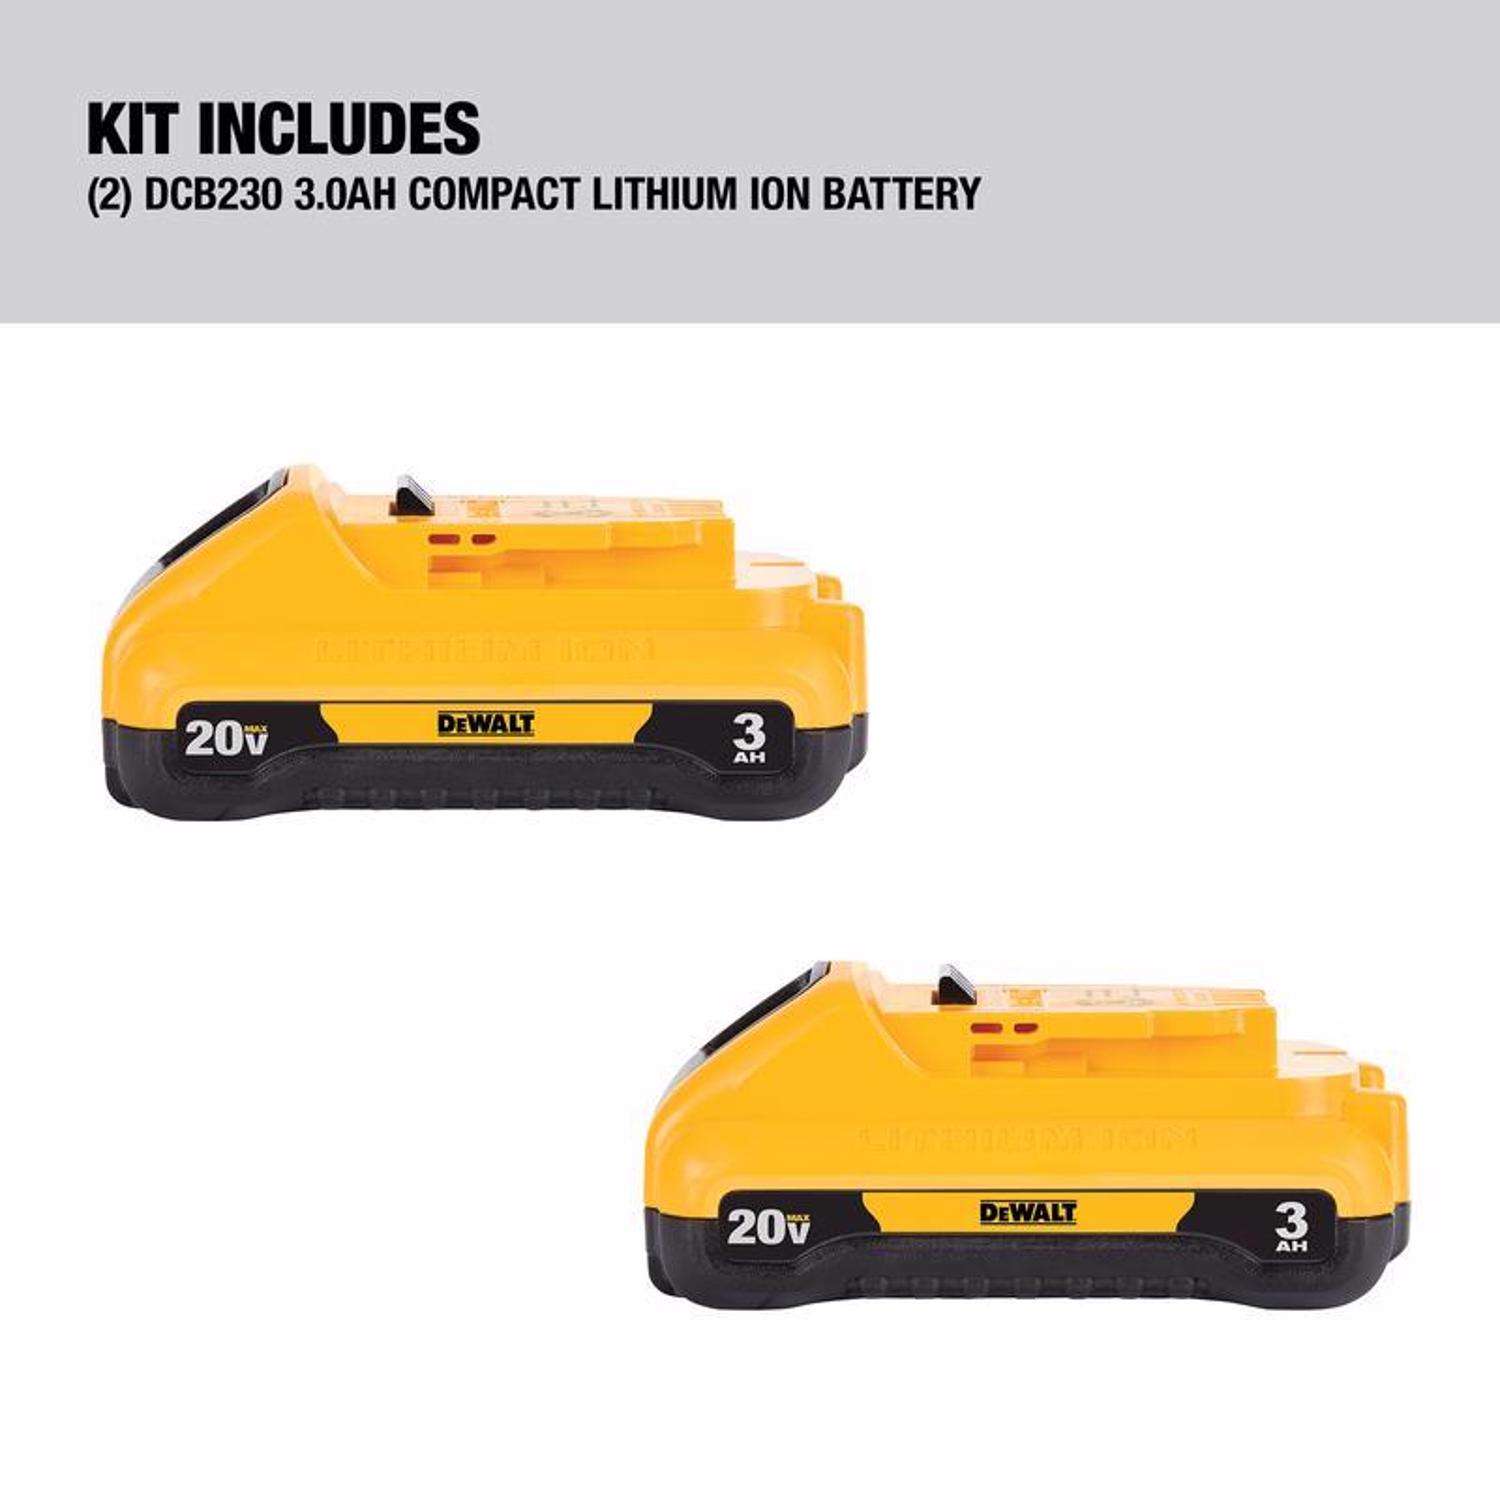 This DeWalt jump starter belongs in your car's emergency kit, and it's 20%  off pre-Black Friday at